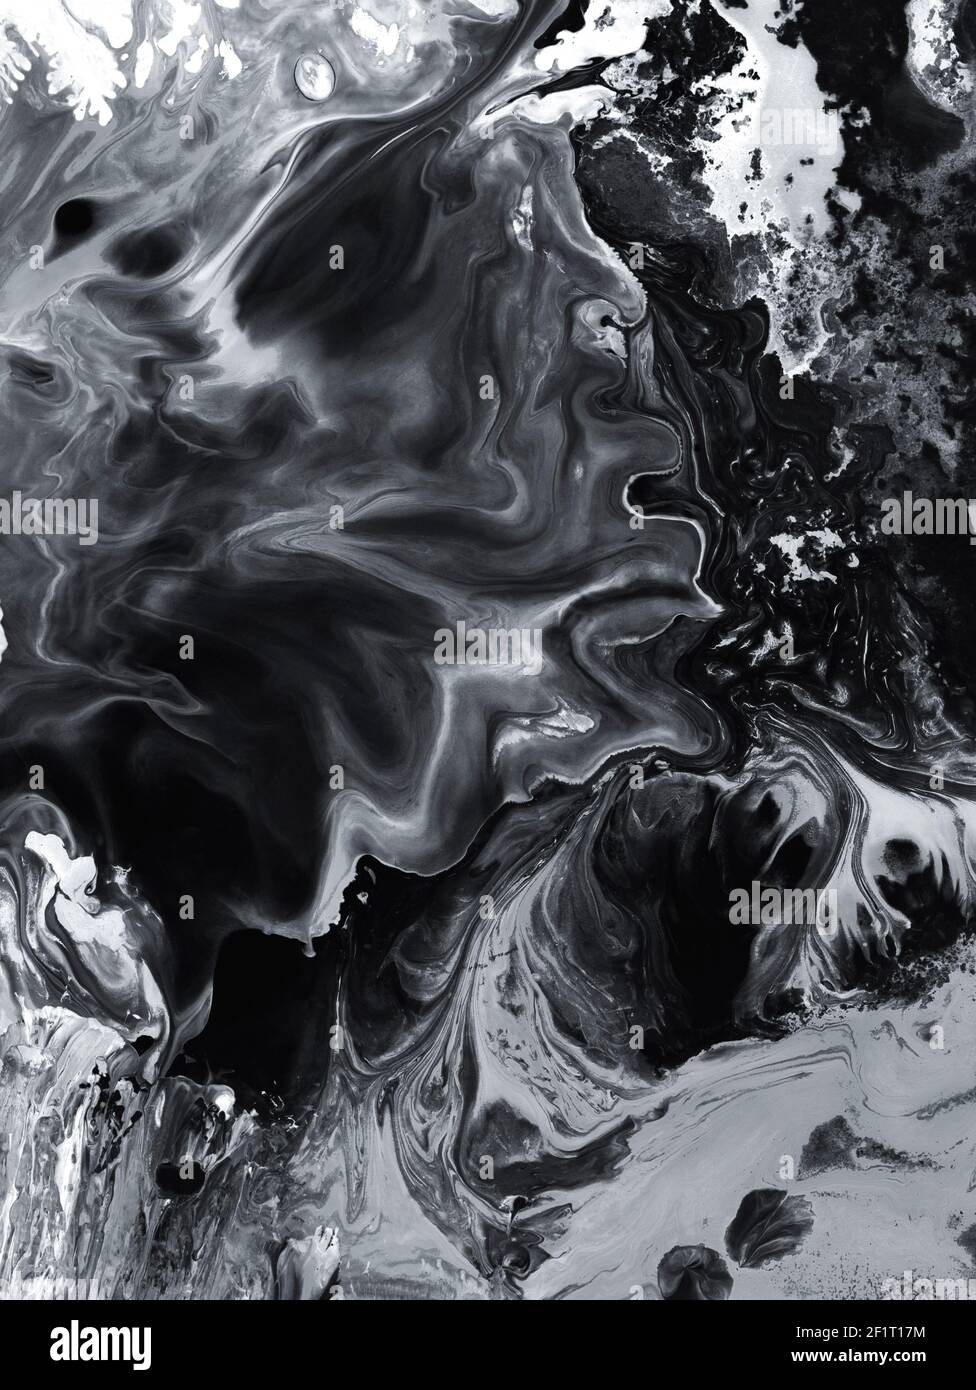 Oil painting texture Black and White Stock Photos & Images - Alamy